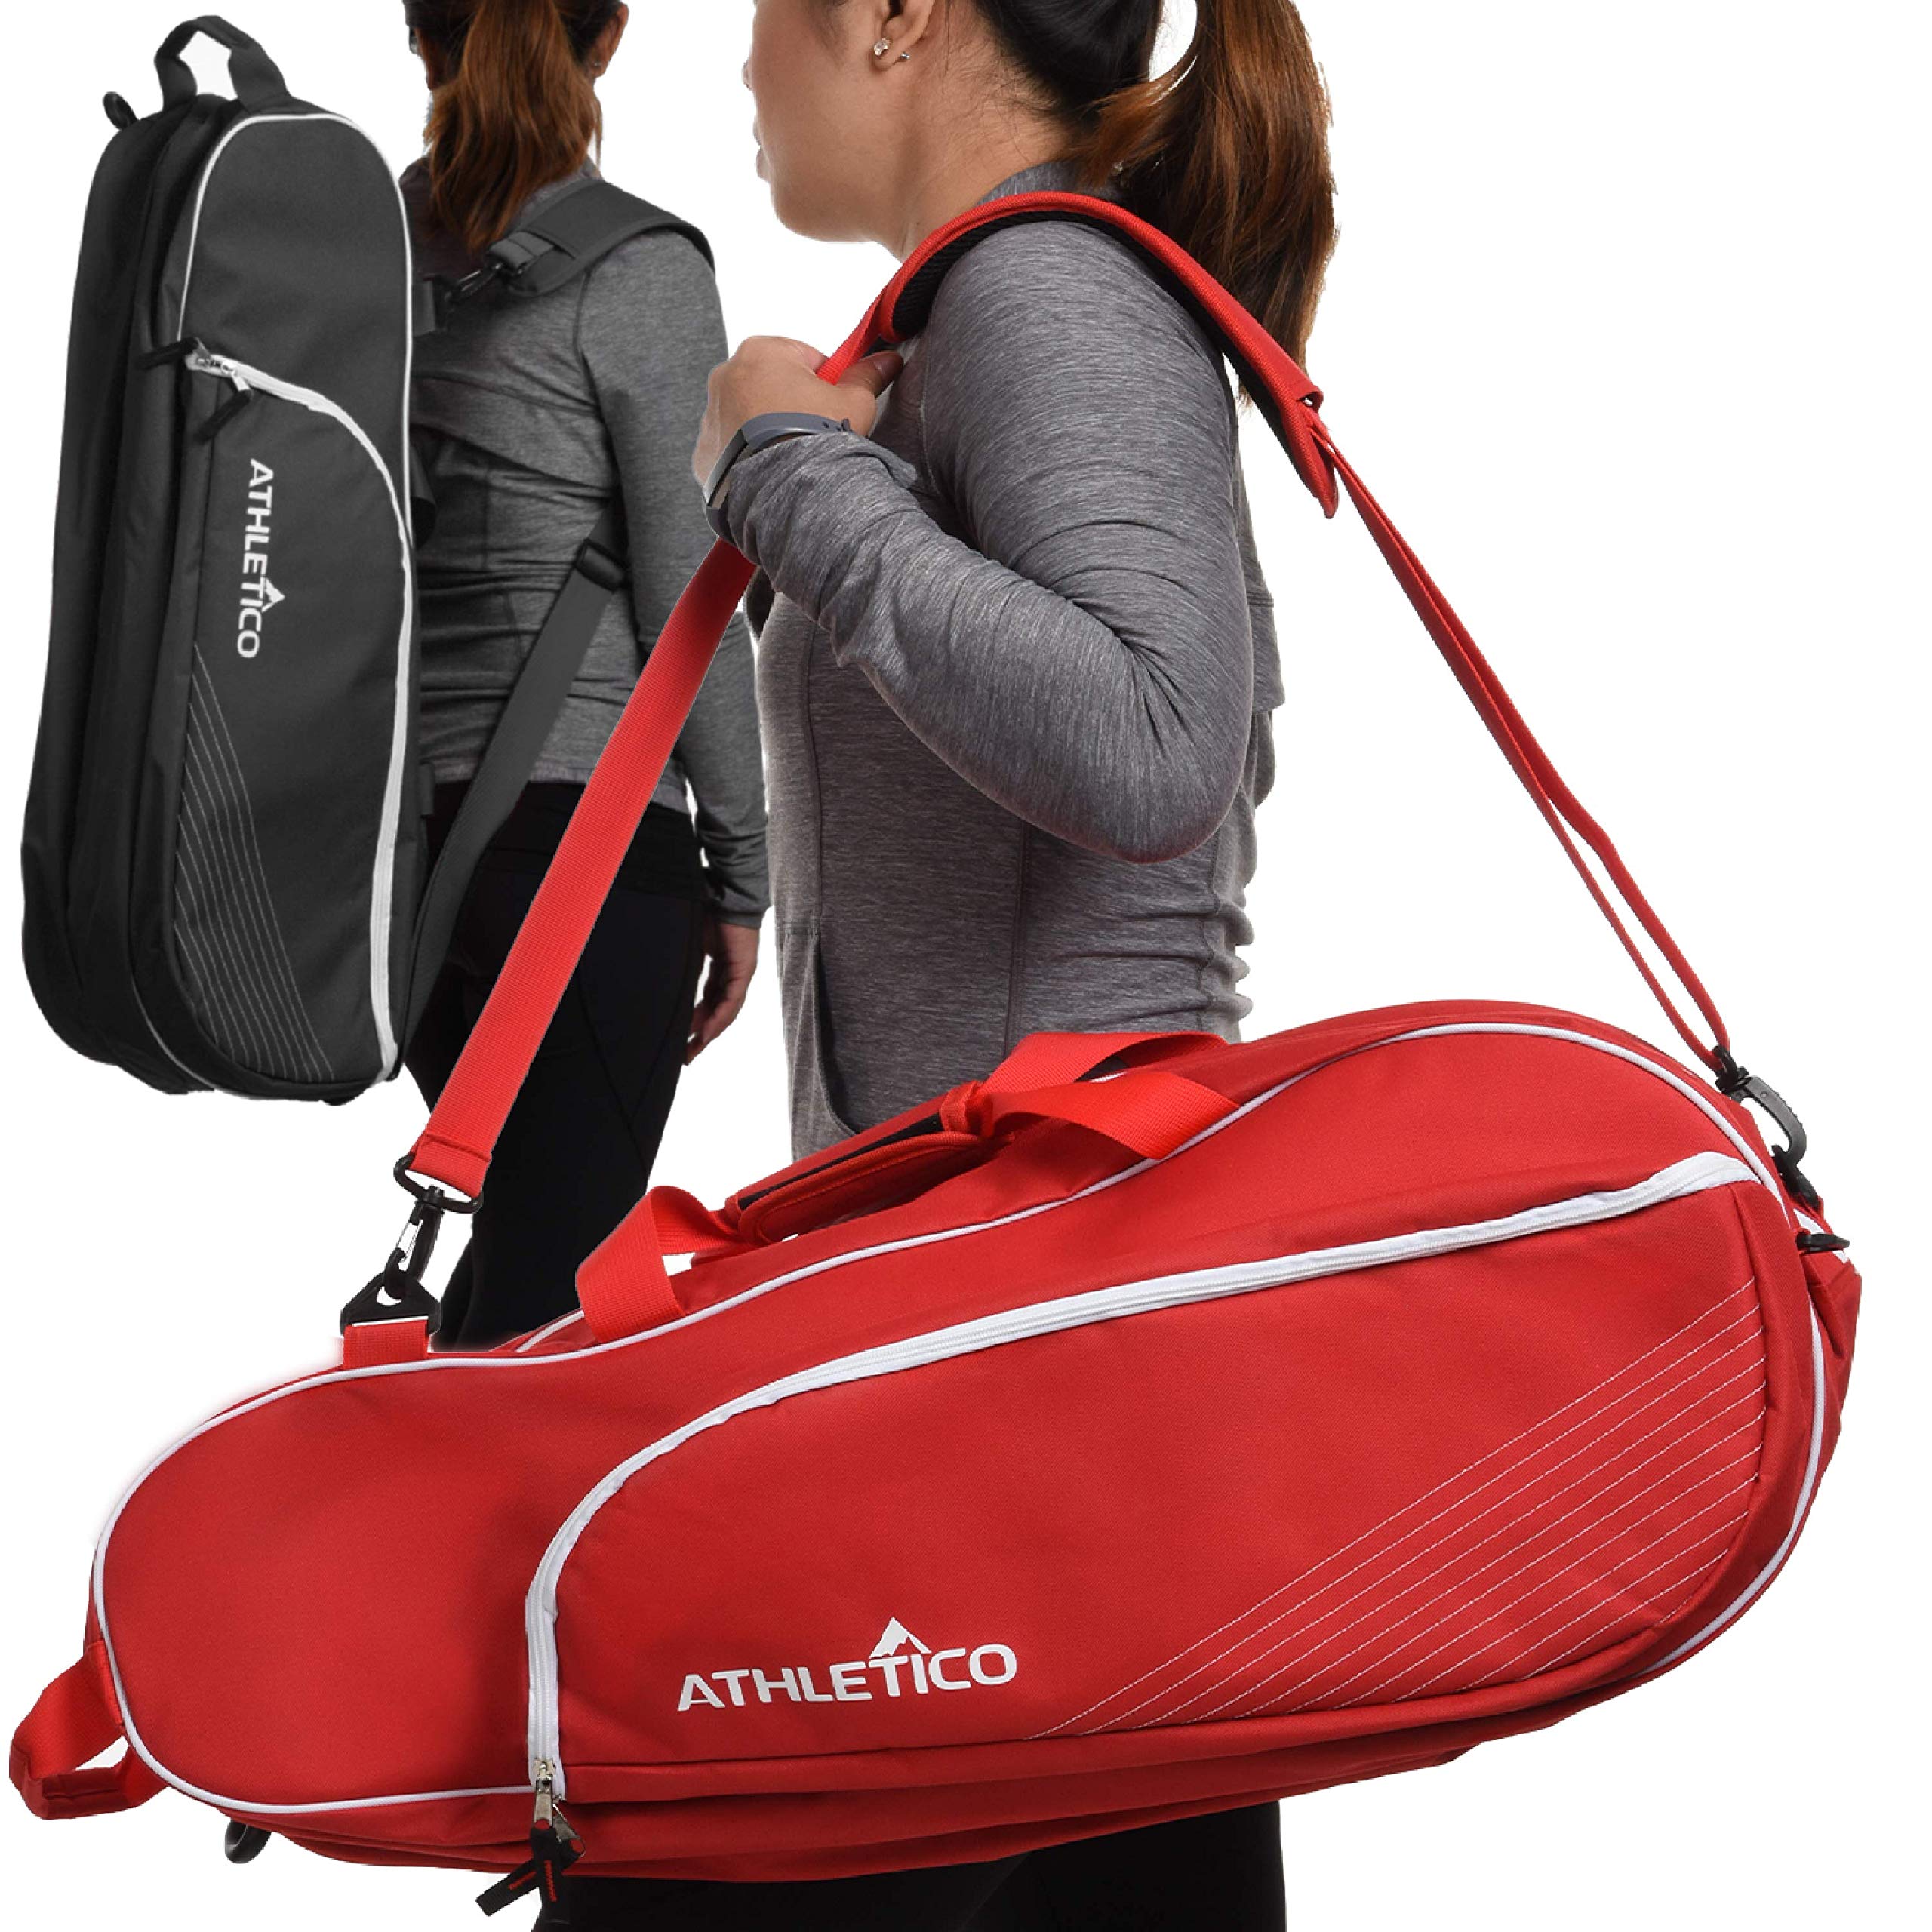 Athletico 6 Racquet Tennis Bag | Padded to Protect Rackets & Lightweight | Professional or Beginner Tennis Players | Unisex Design for Men, Women, Youth and Adults (Black)  - Acceptable